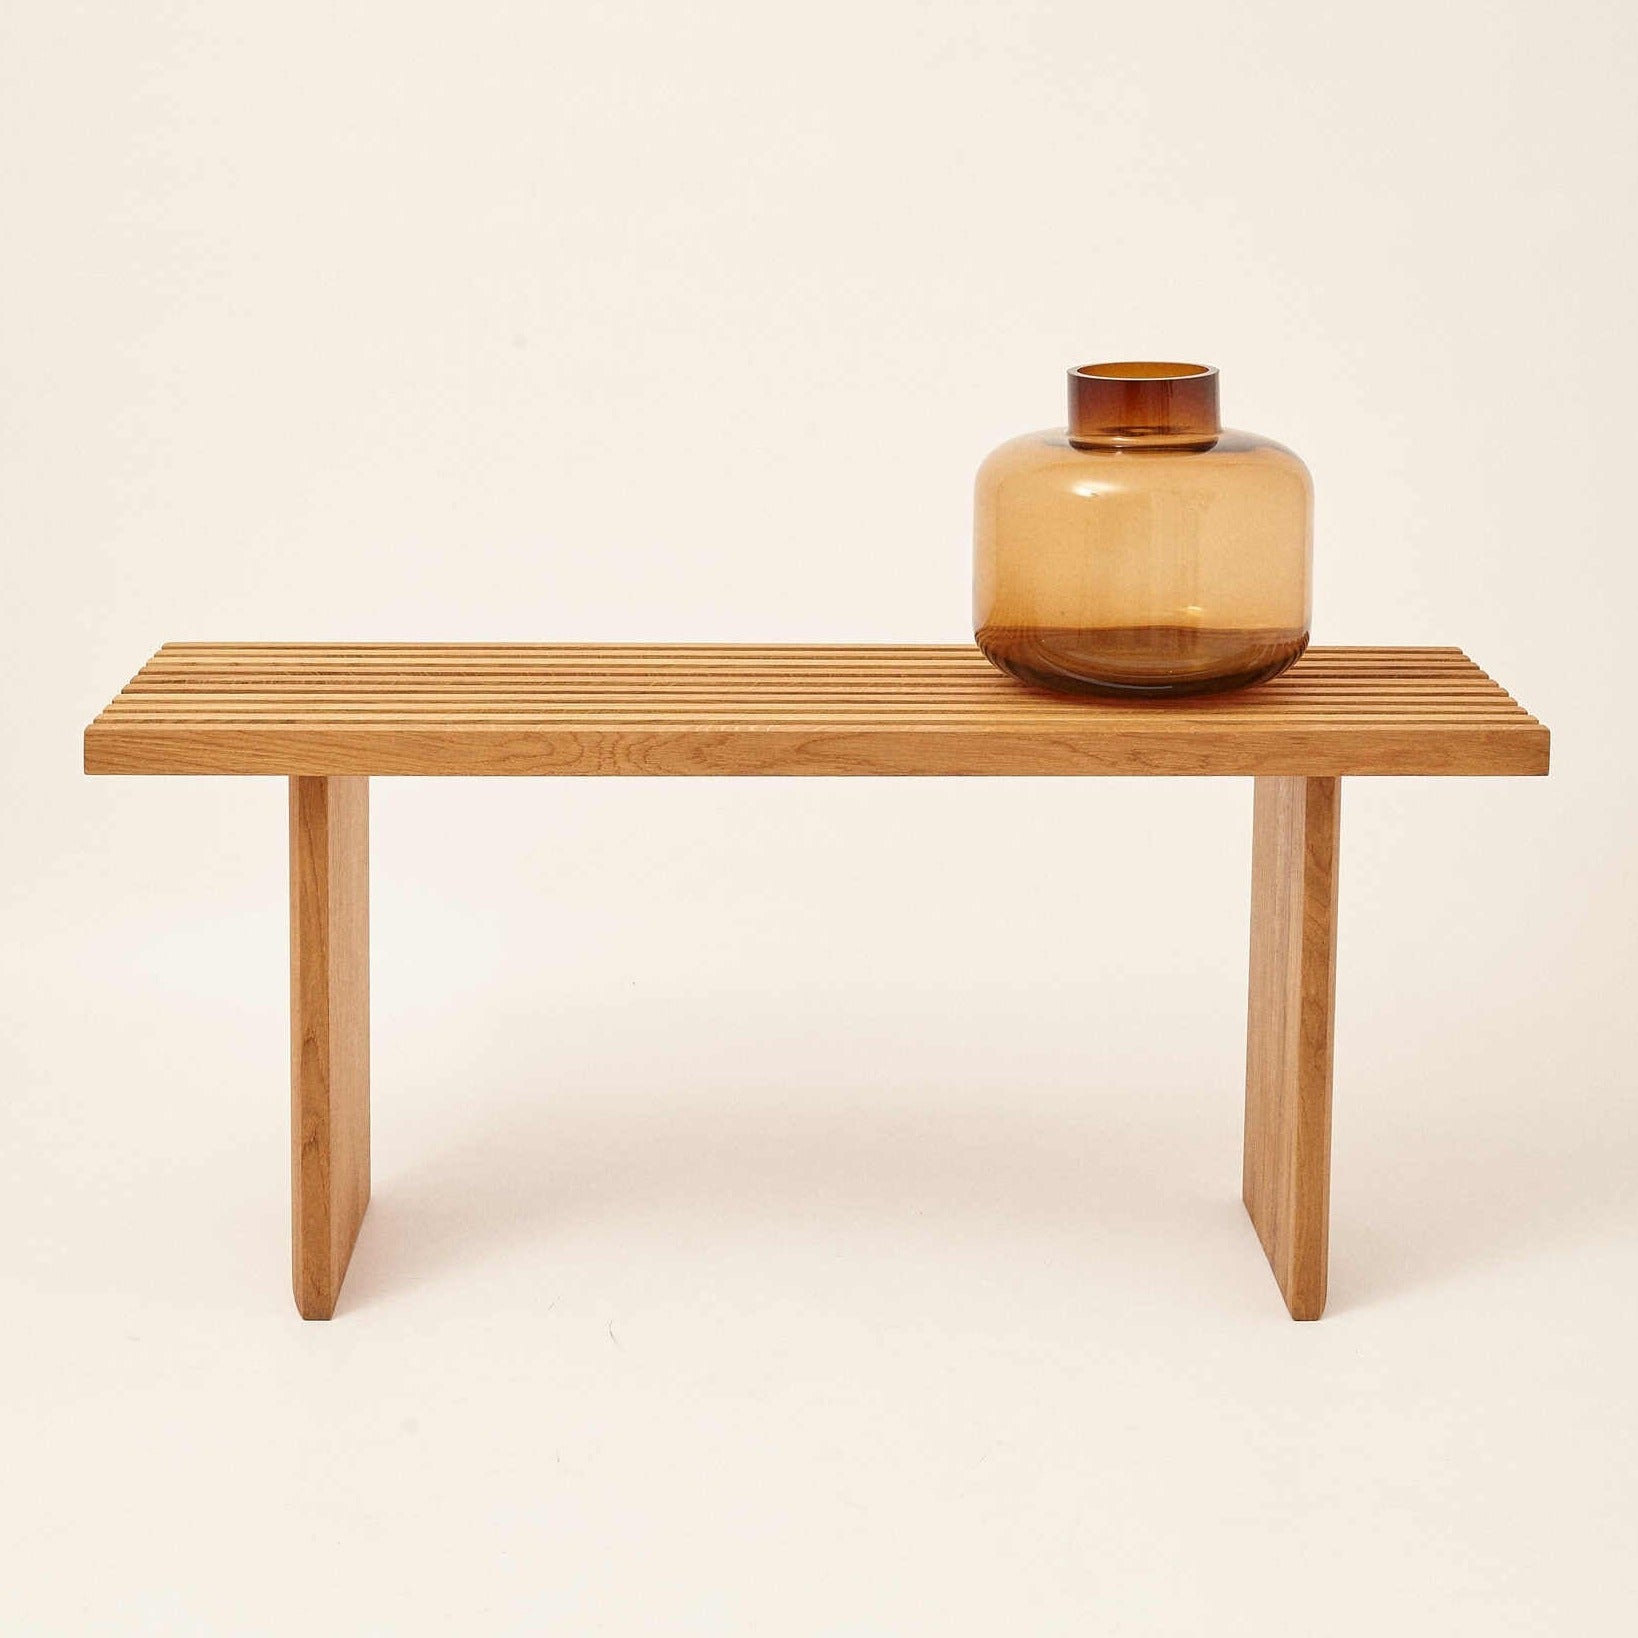 QUBANC Bench 105 natural oak-front view with vase